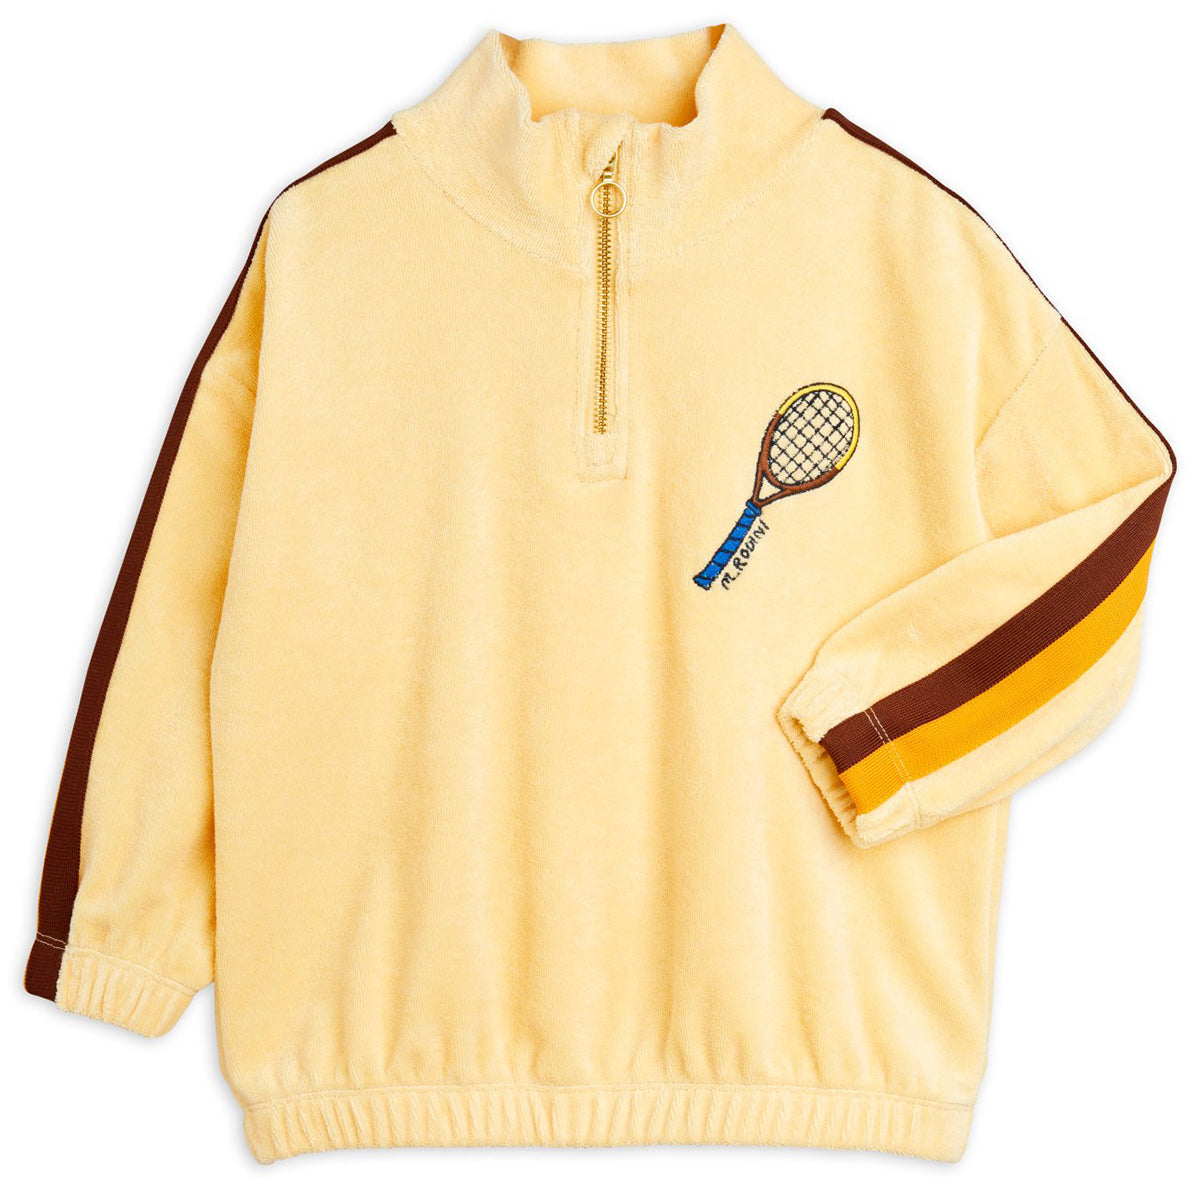 The Tennis Embroidered Half Zip Sweatshirt from Mini Rodini. Embroidered Tennis motif on the chest